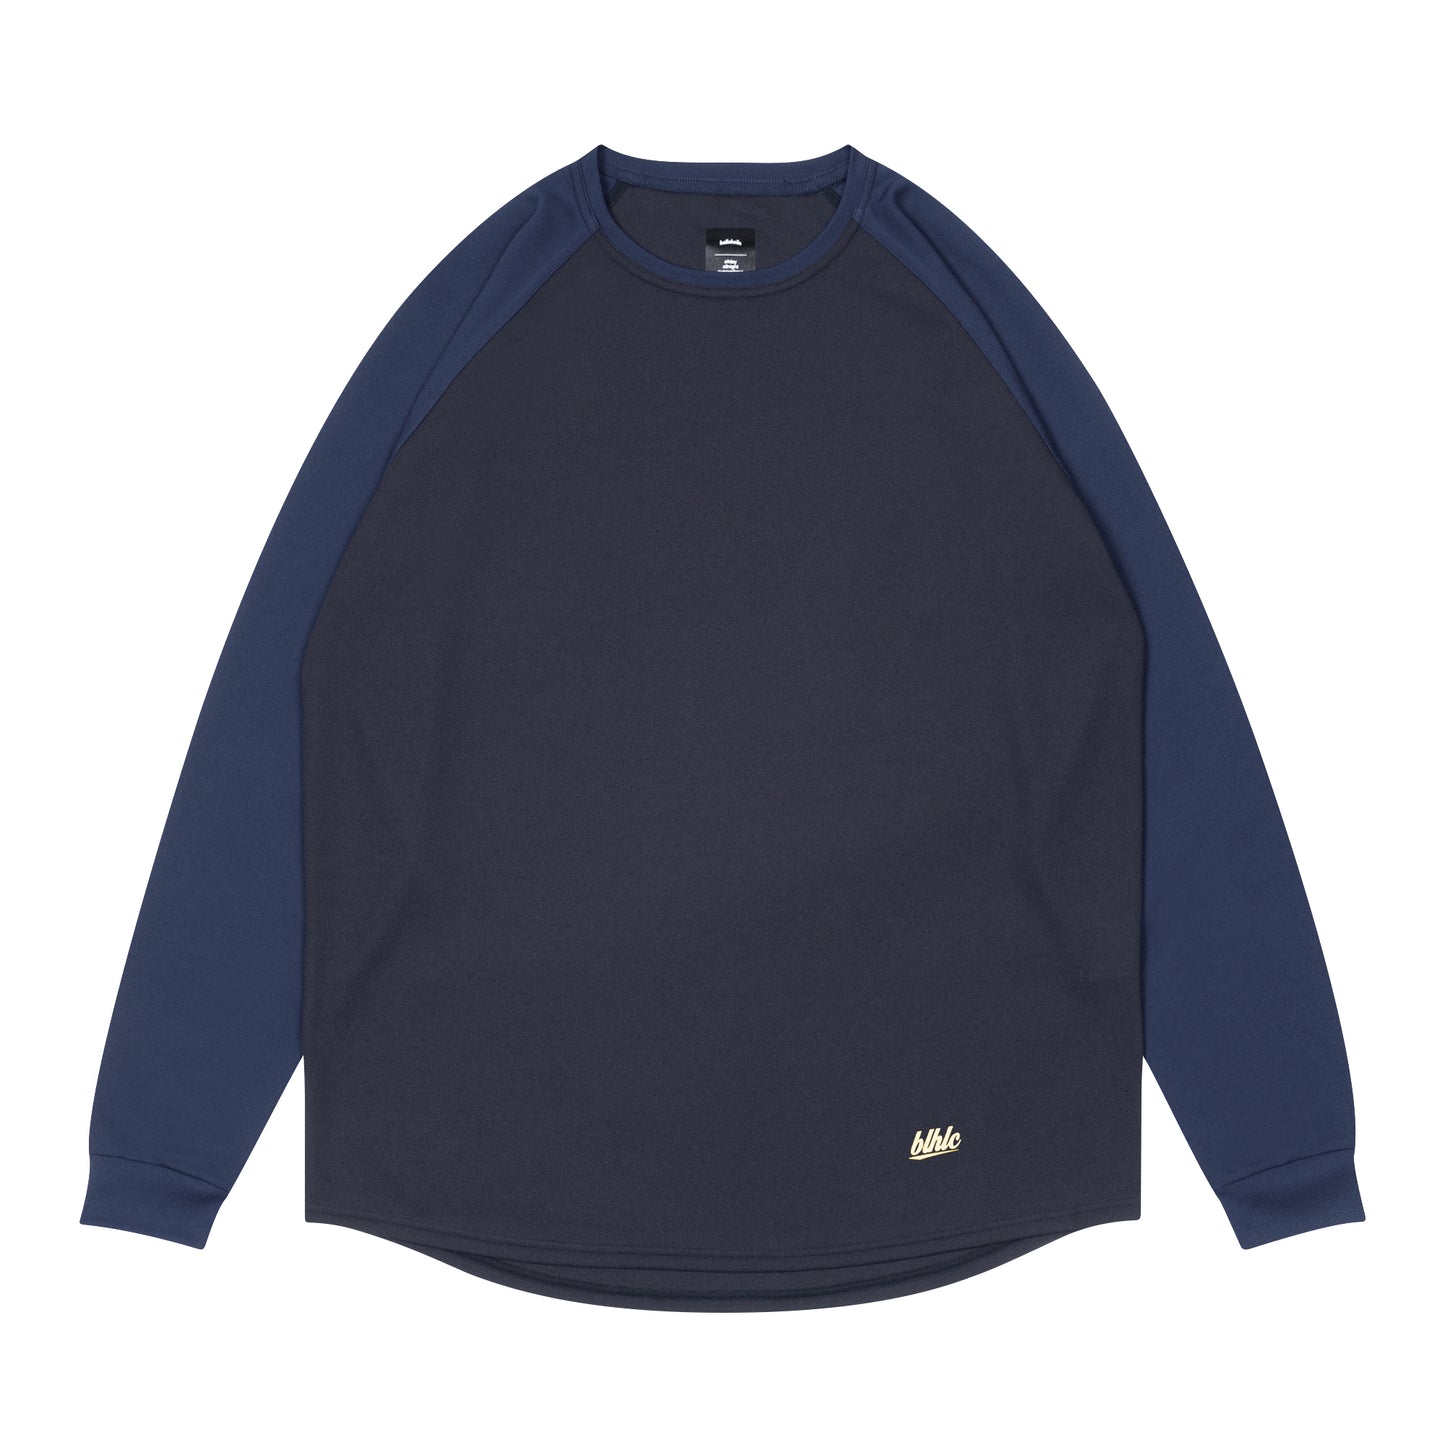 2 Tone blhlc Cool Long Tee (navy)